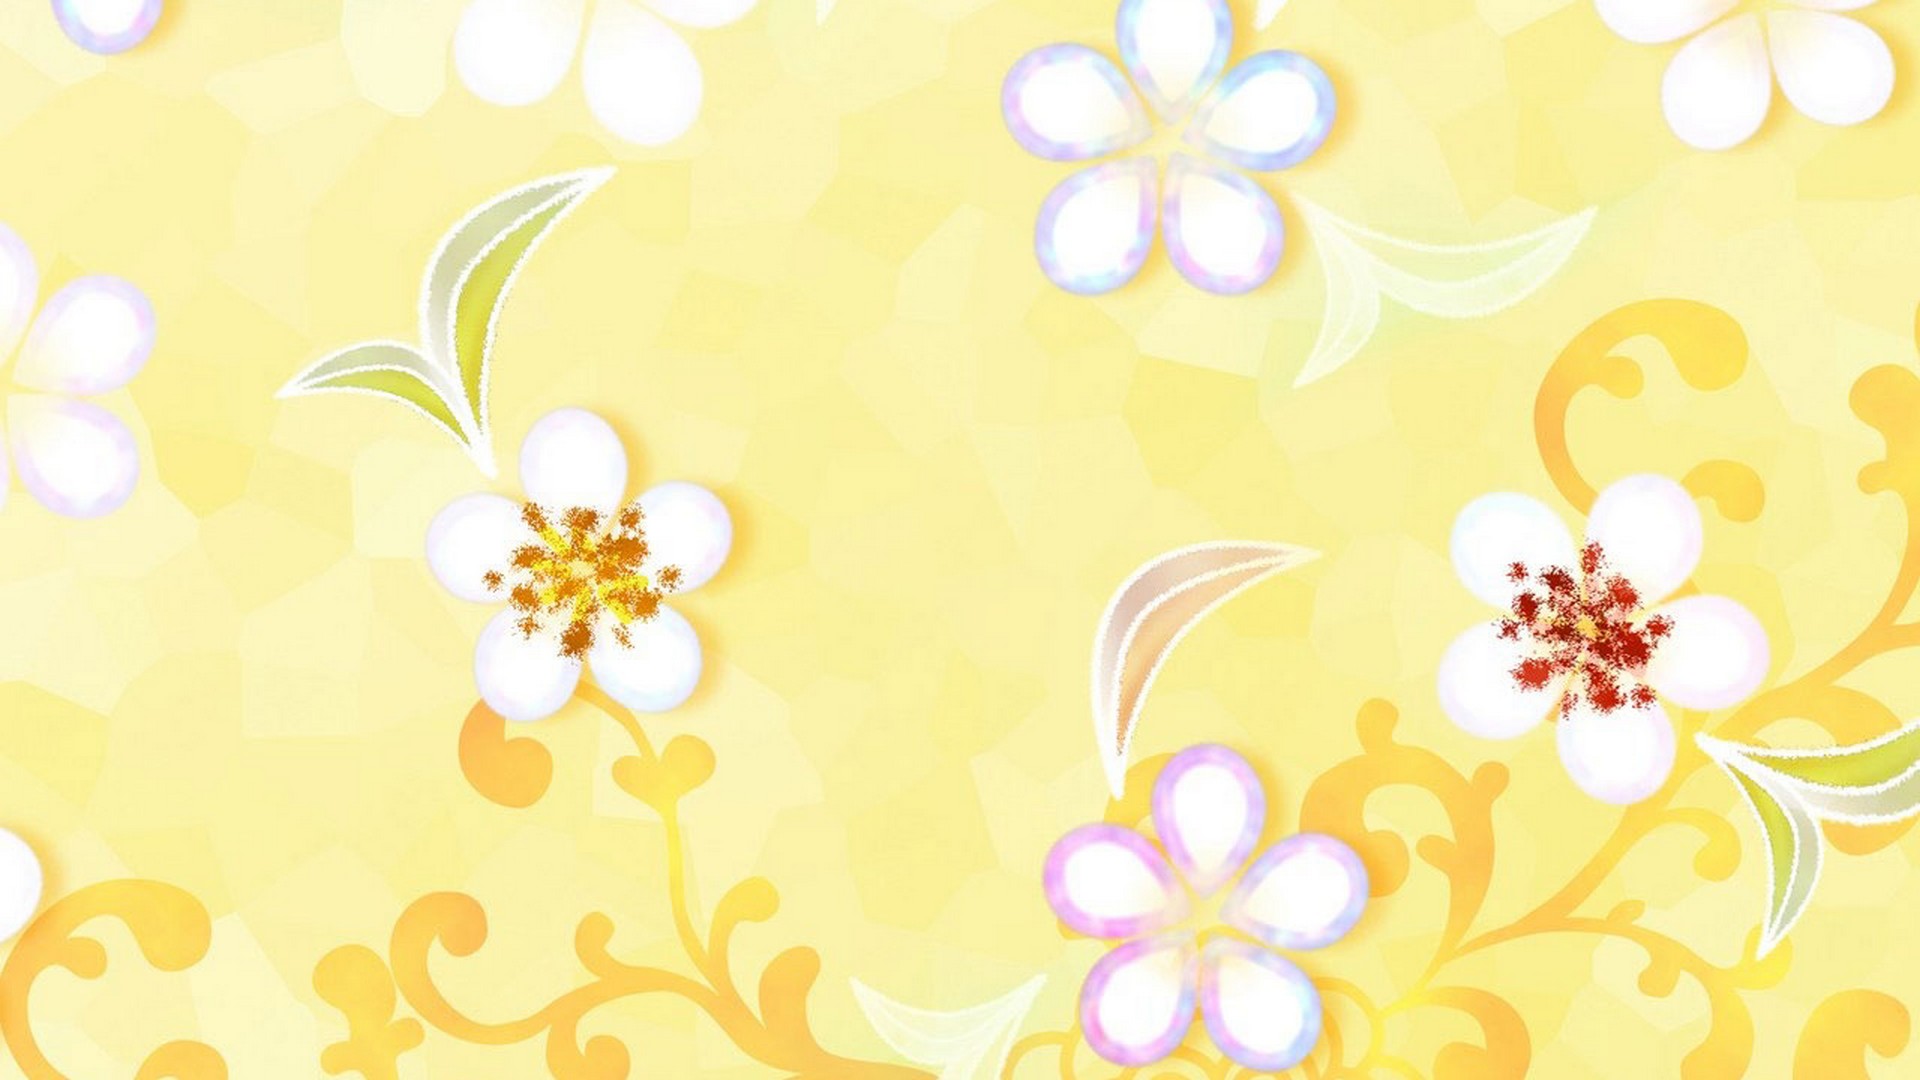 Yellow Flower Desktop Backgrounds HD with image resolution 1920x1080 pixel. You can use this wallpaper as background for your desktop Computer Screensavers, Android or iPhone smartphones